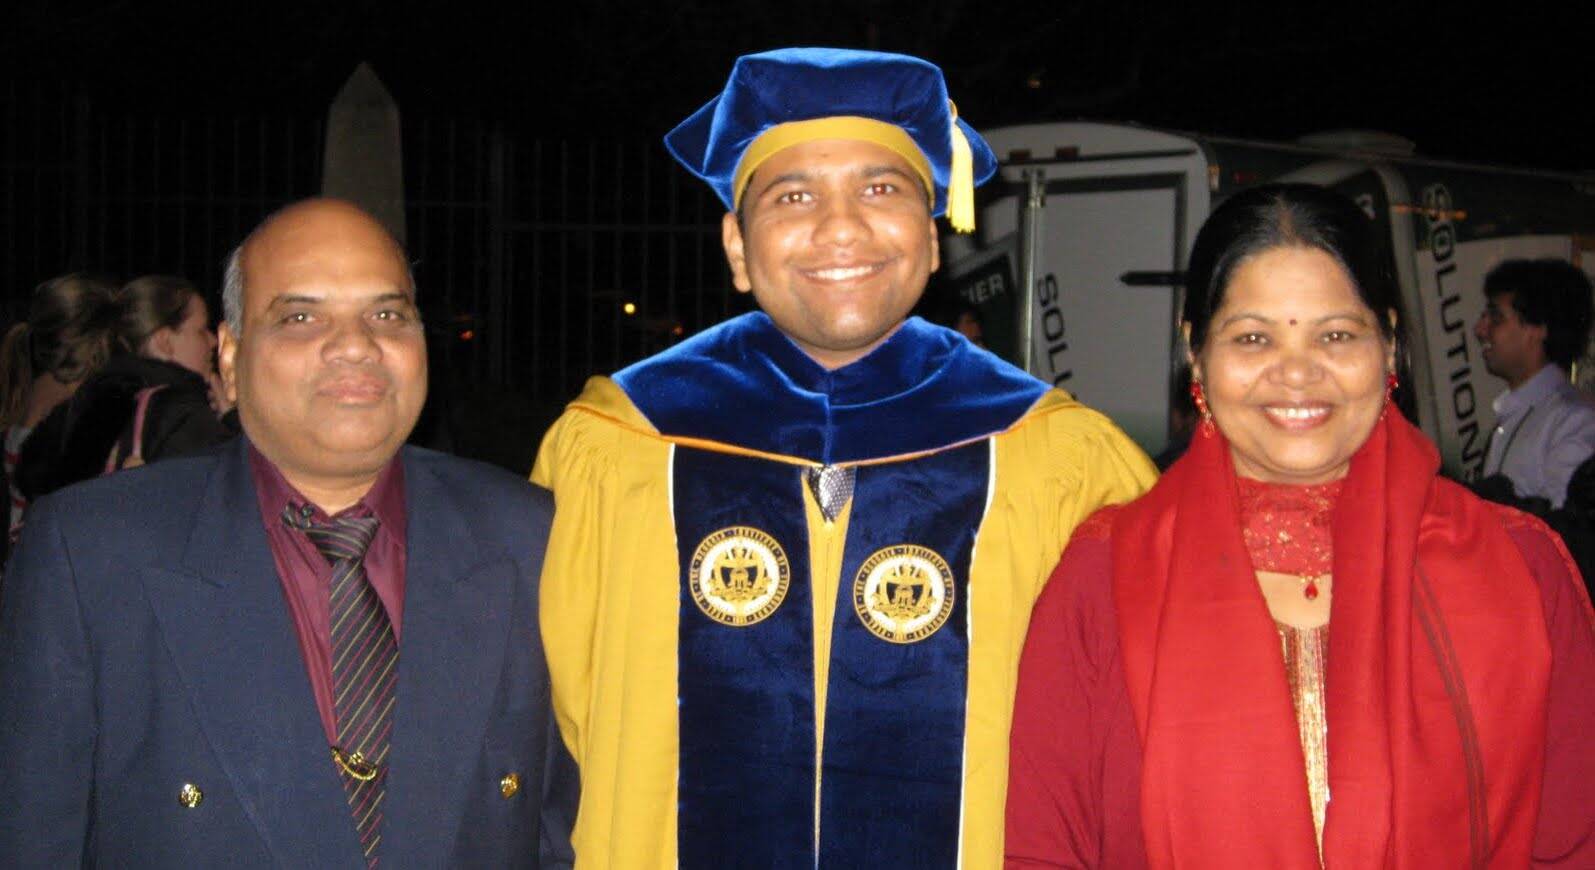 Image My parents and I at my PhD graduation ceremony at Georgia Tech in 2010. This is particularly poignant because my father is also a chemical engineer, and he encouraged me to pursue graduate studies.